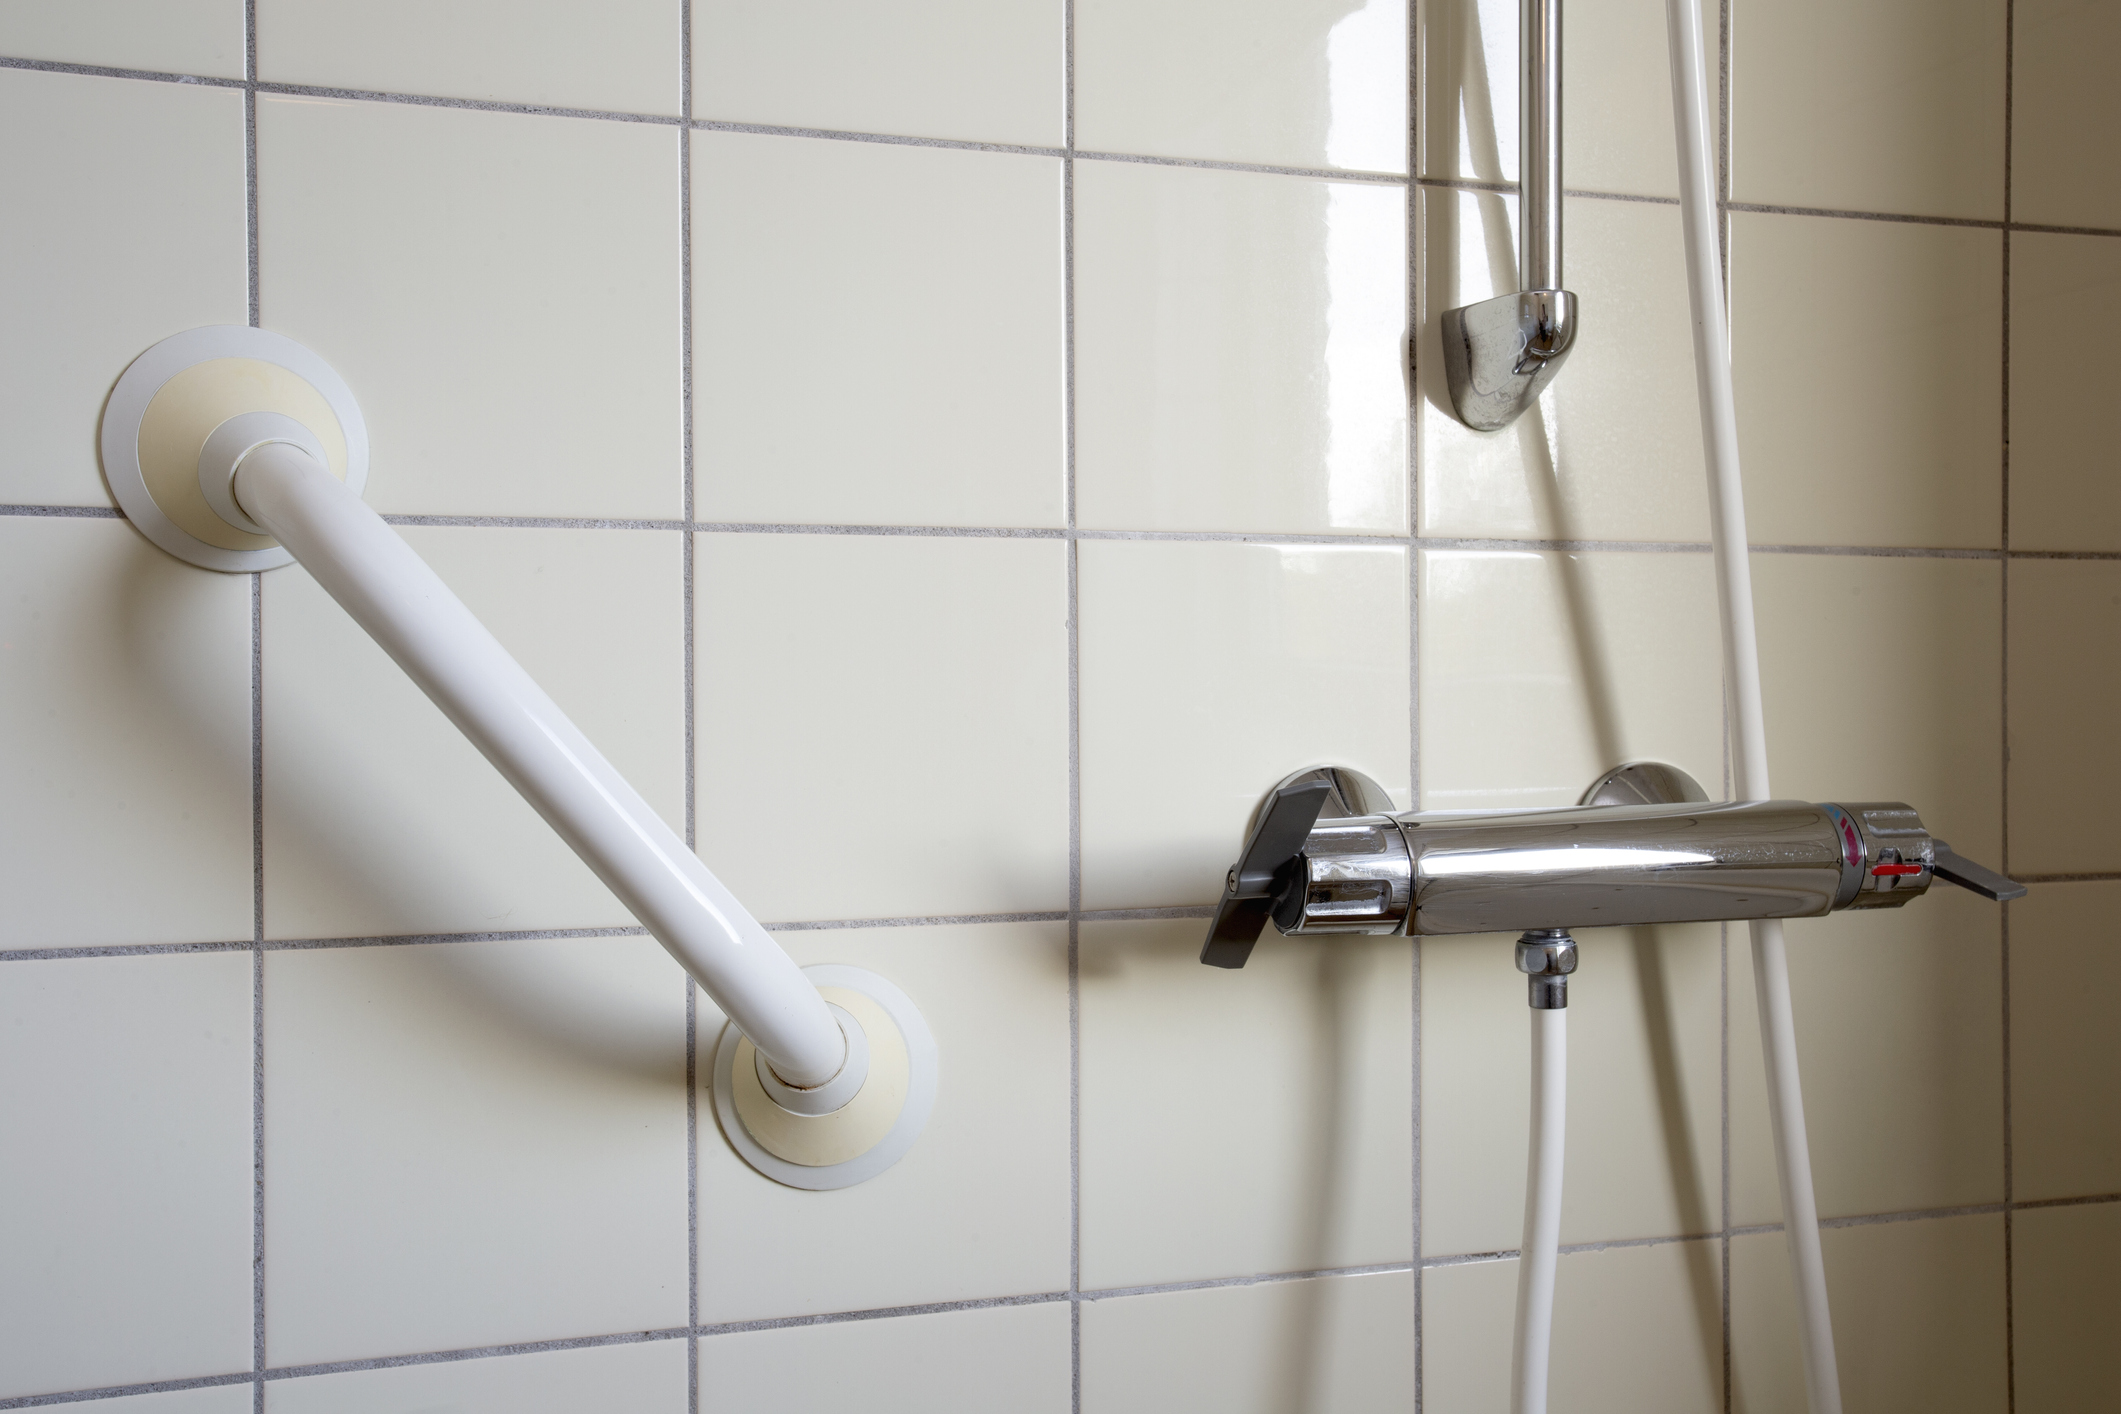 Lifestyle image of grab rail attached to the wall of a shower enclosure